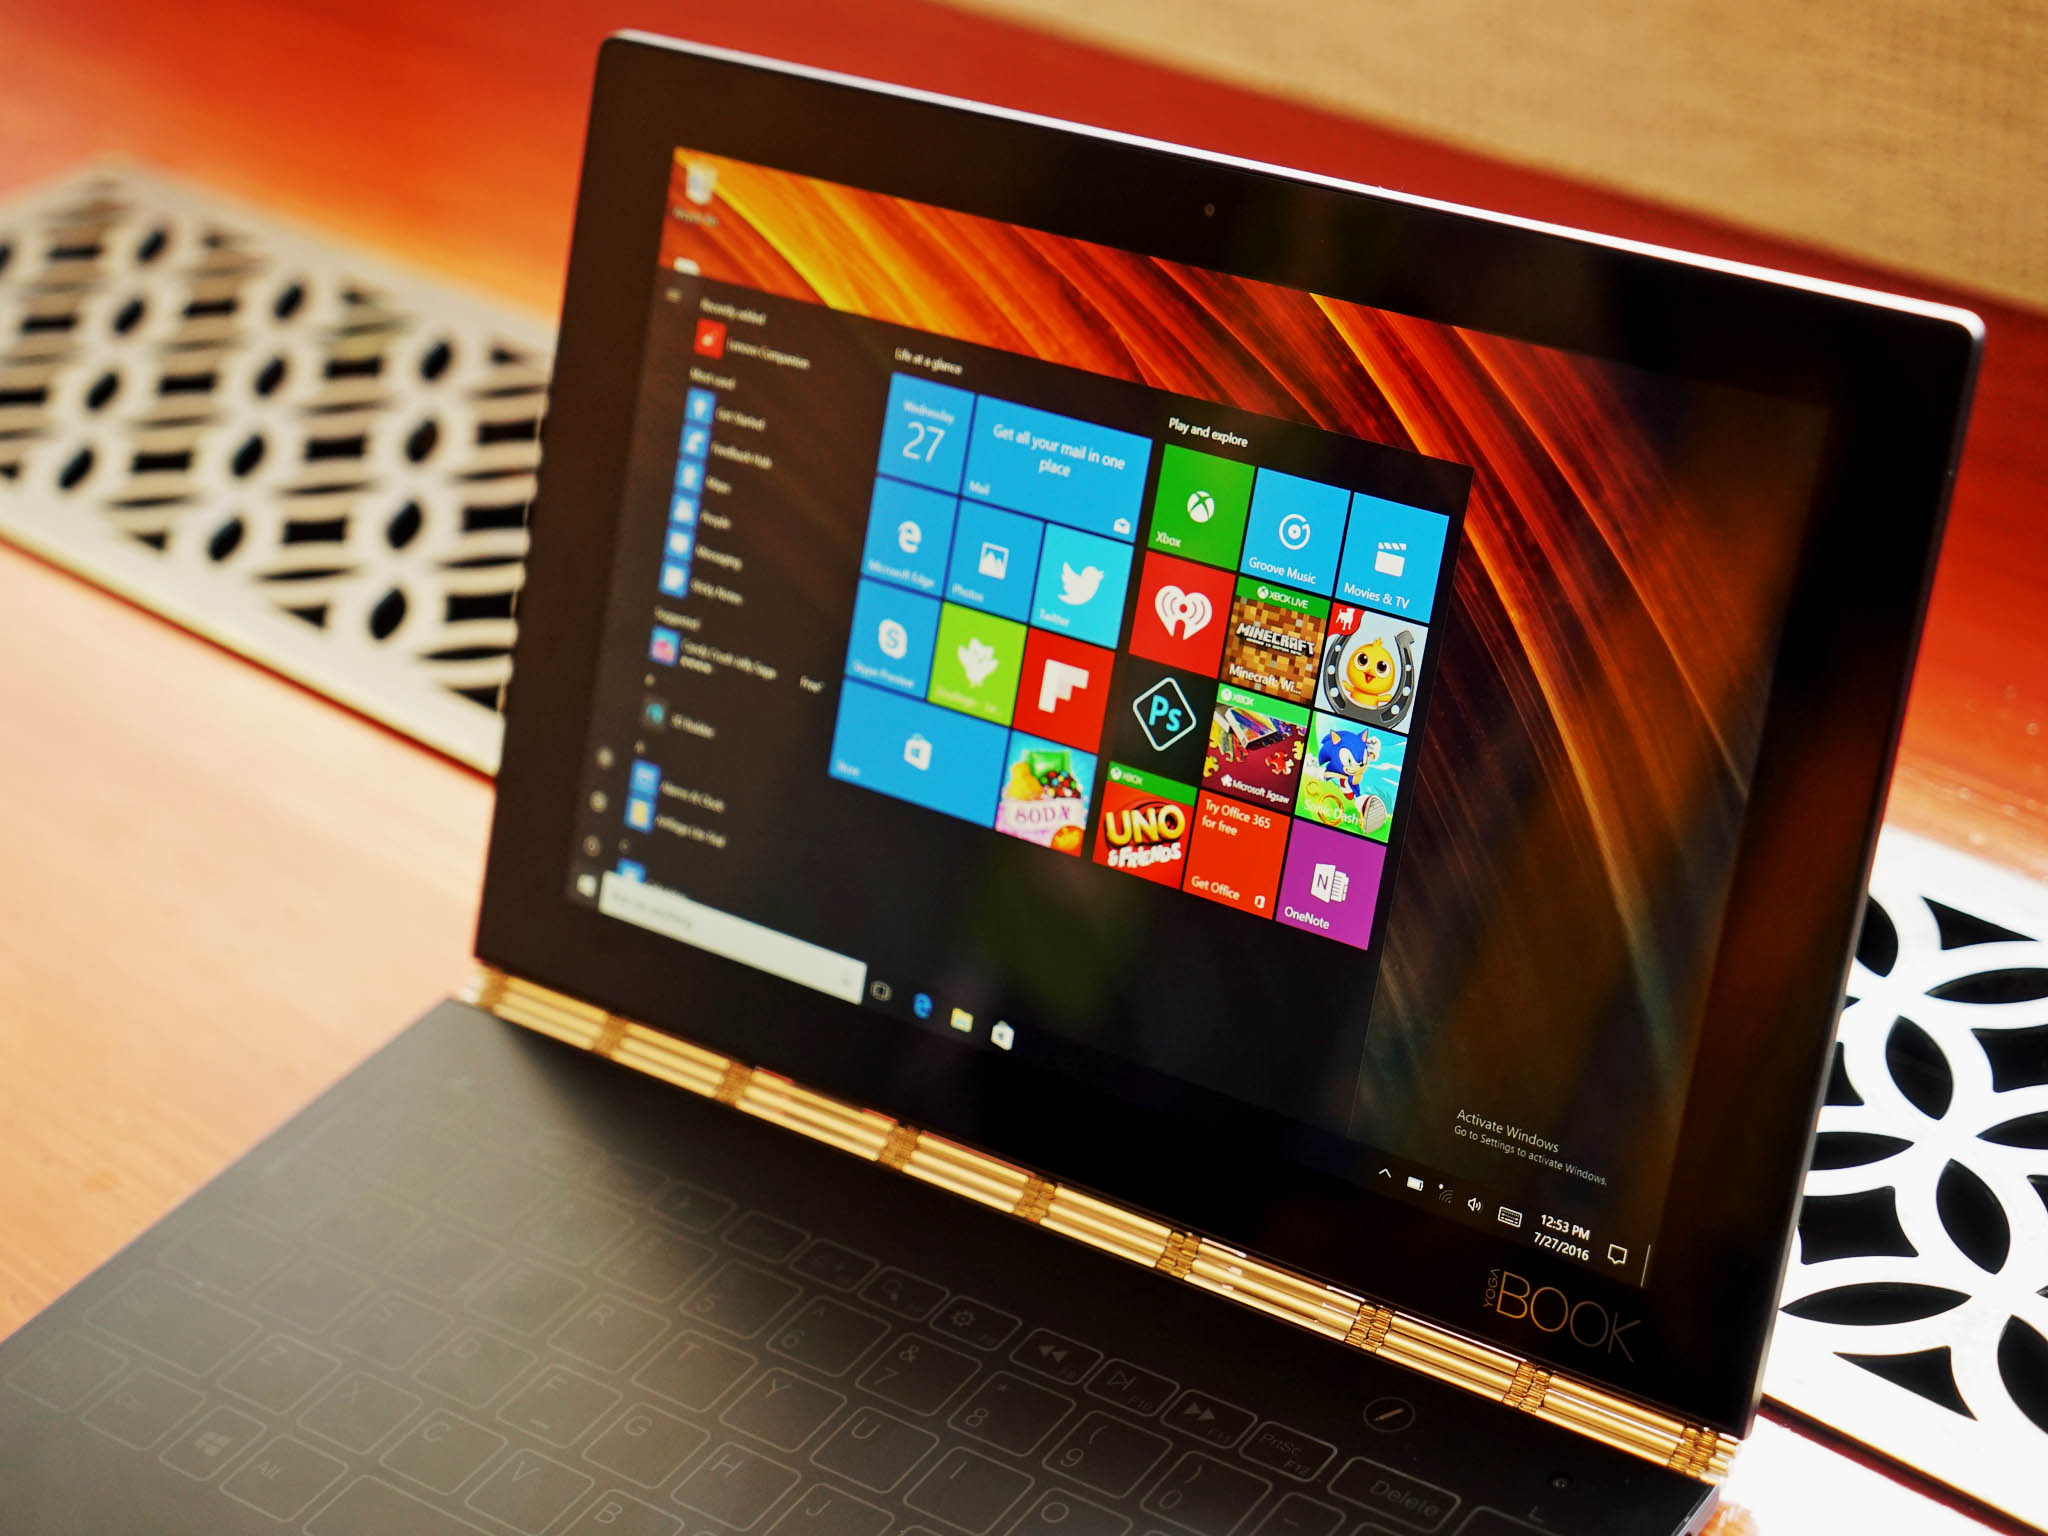 Unboxing and hands on with the Lenovo Yoga Book with Windows